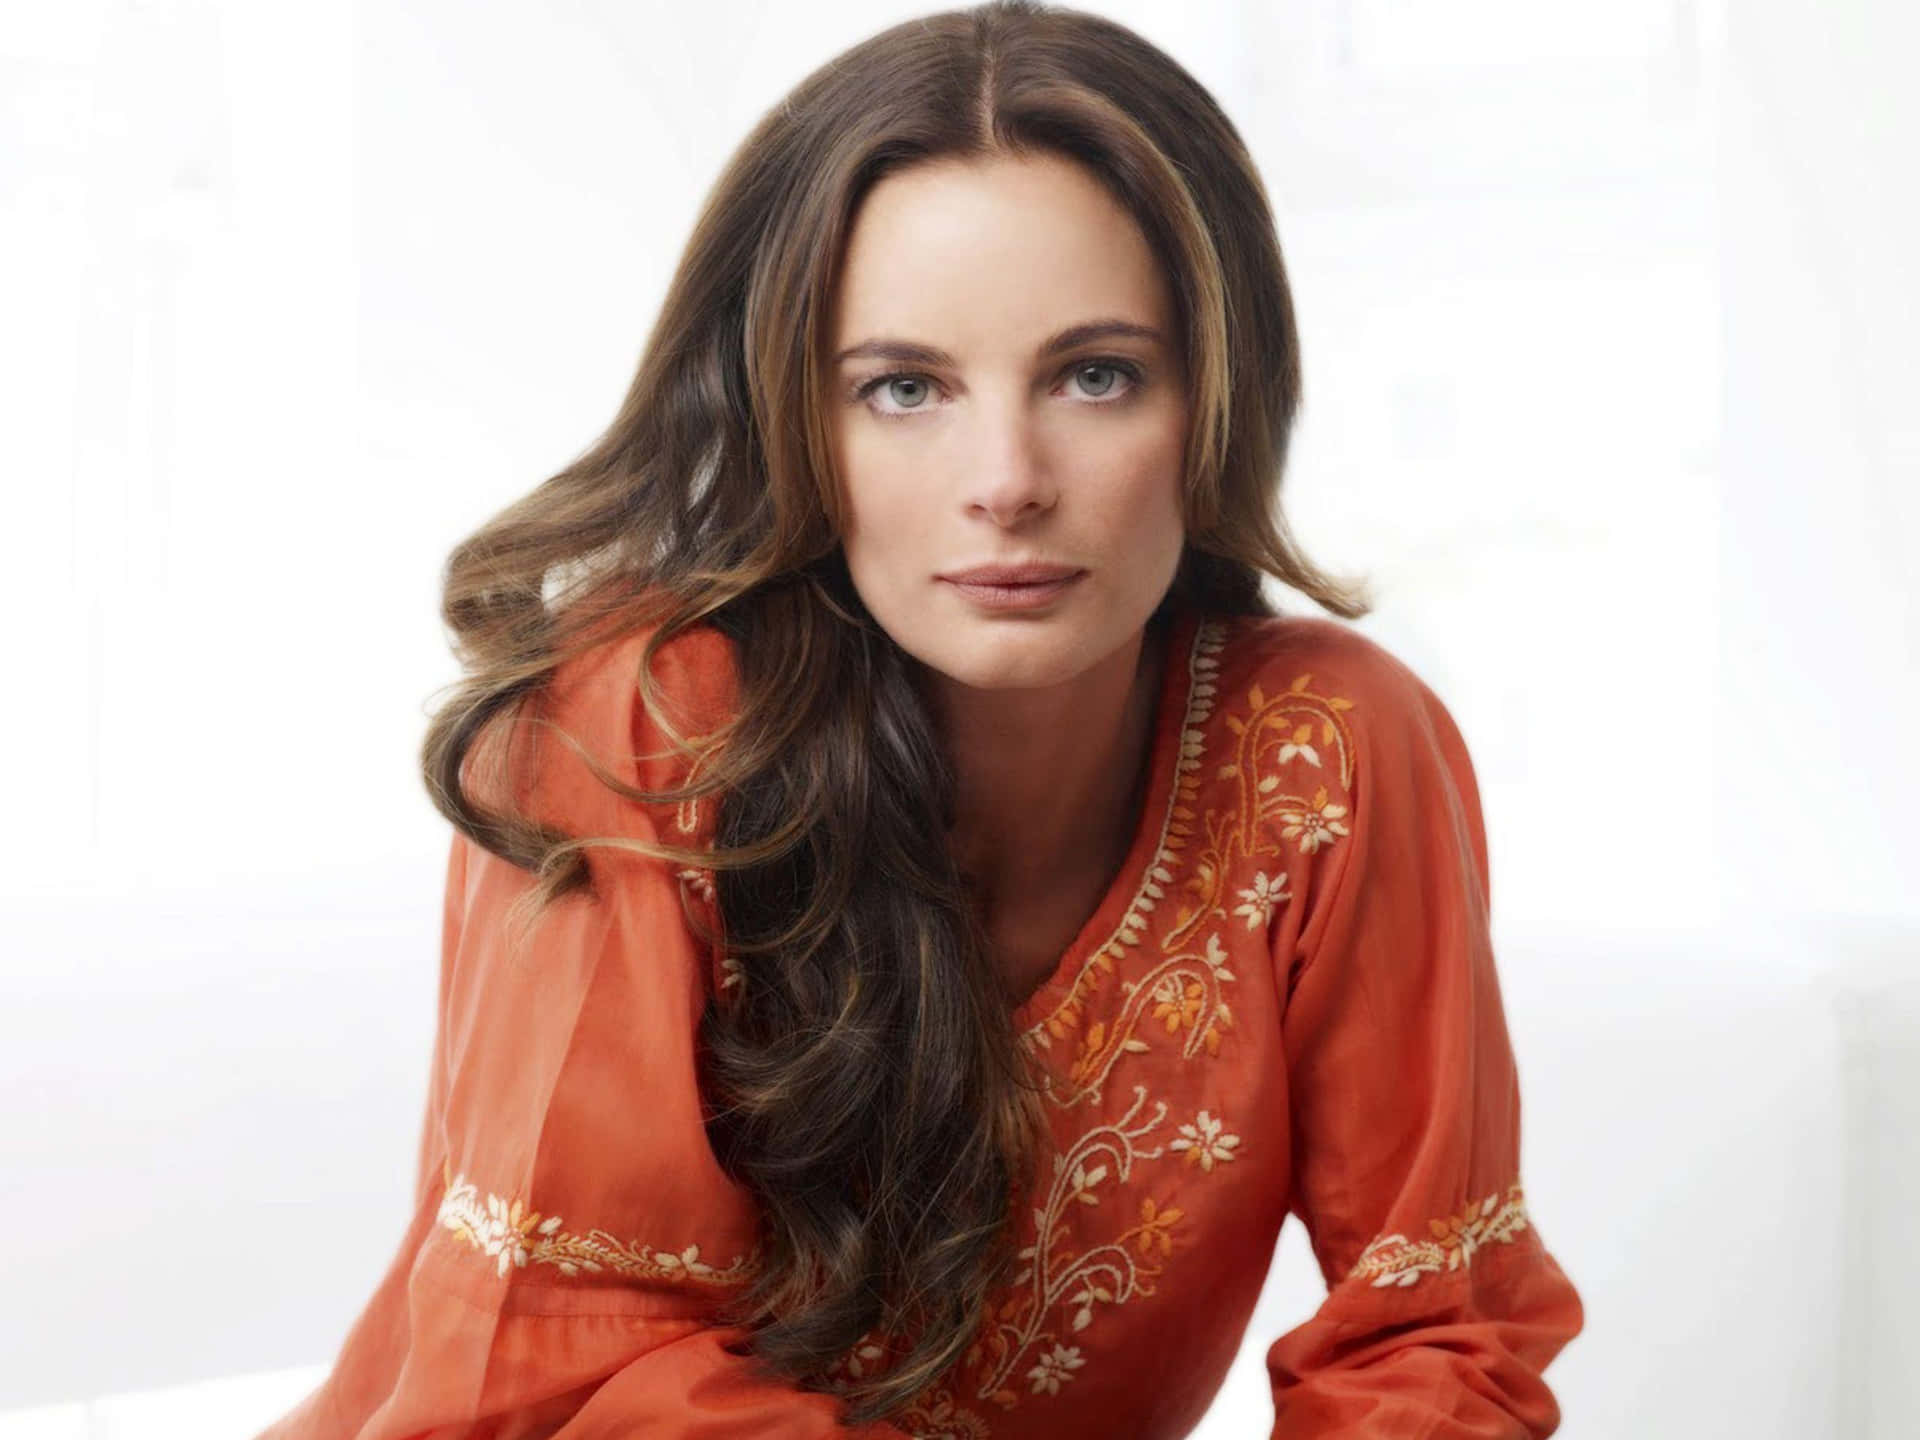 Graceful Gabrielle Anwar posing in a stylish outfit Wallpaper